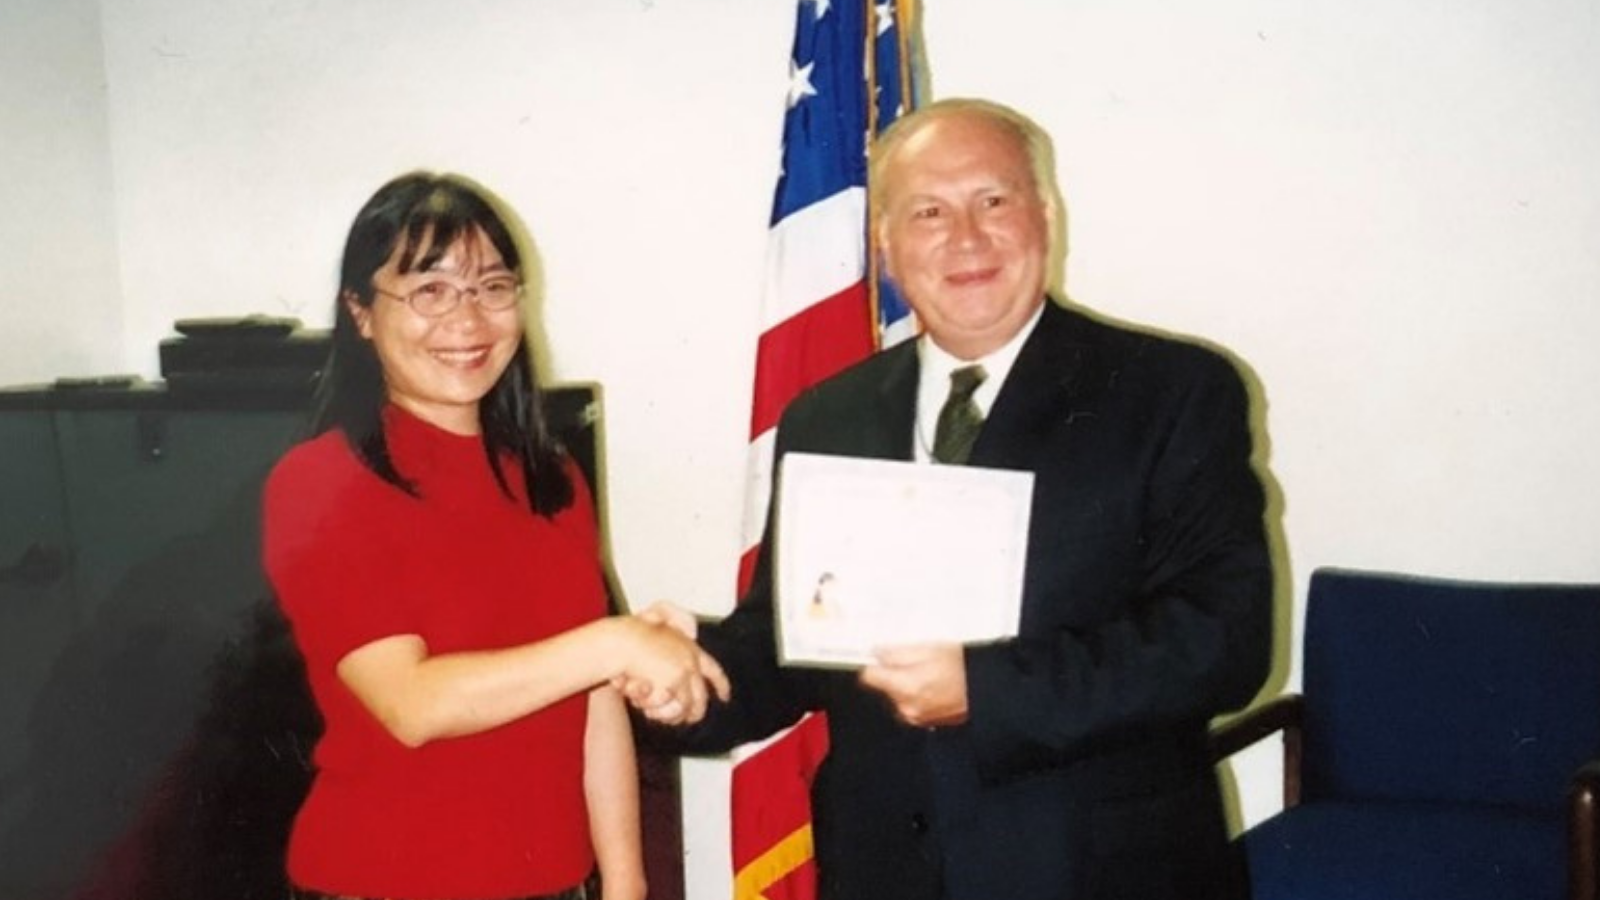 Foreign Service Officer and author Chunnong Saeger is naturalized as a U.S. Citizen in September 2001. (Photo courtesy of the author)